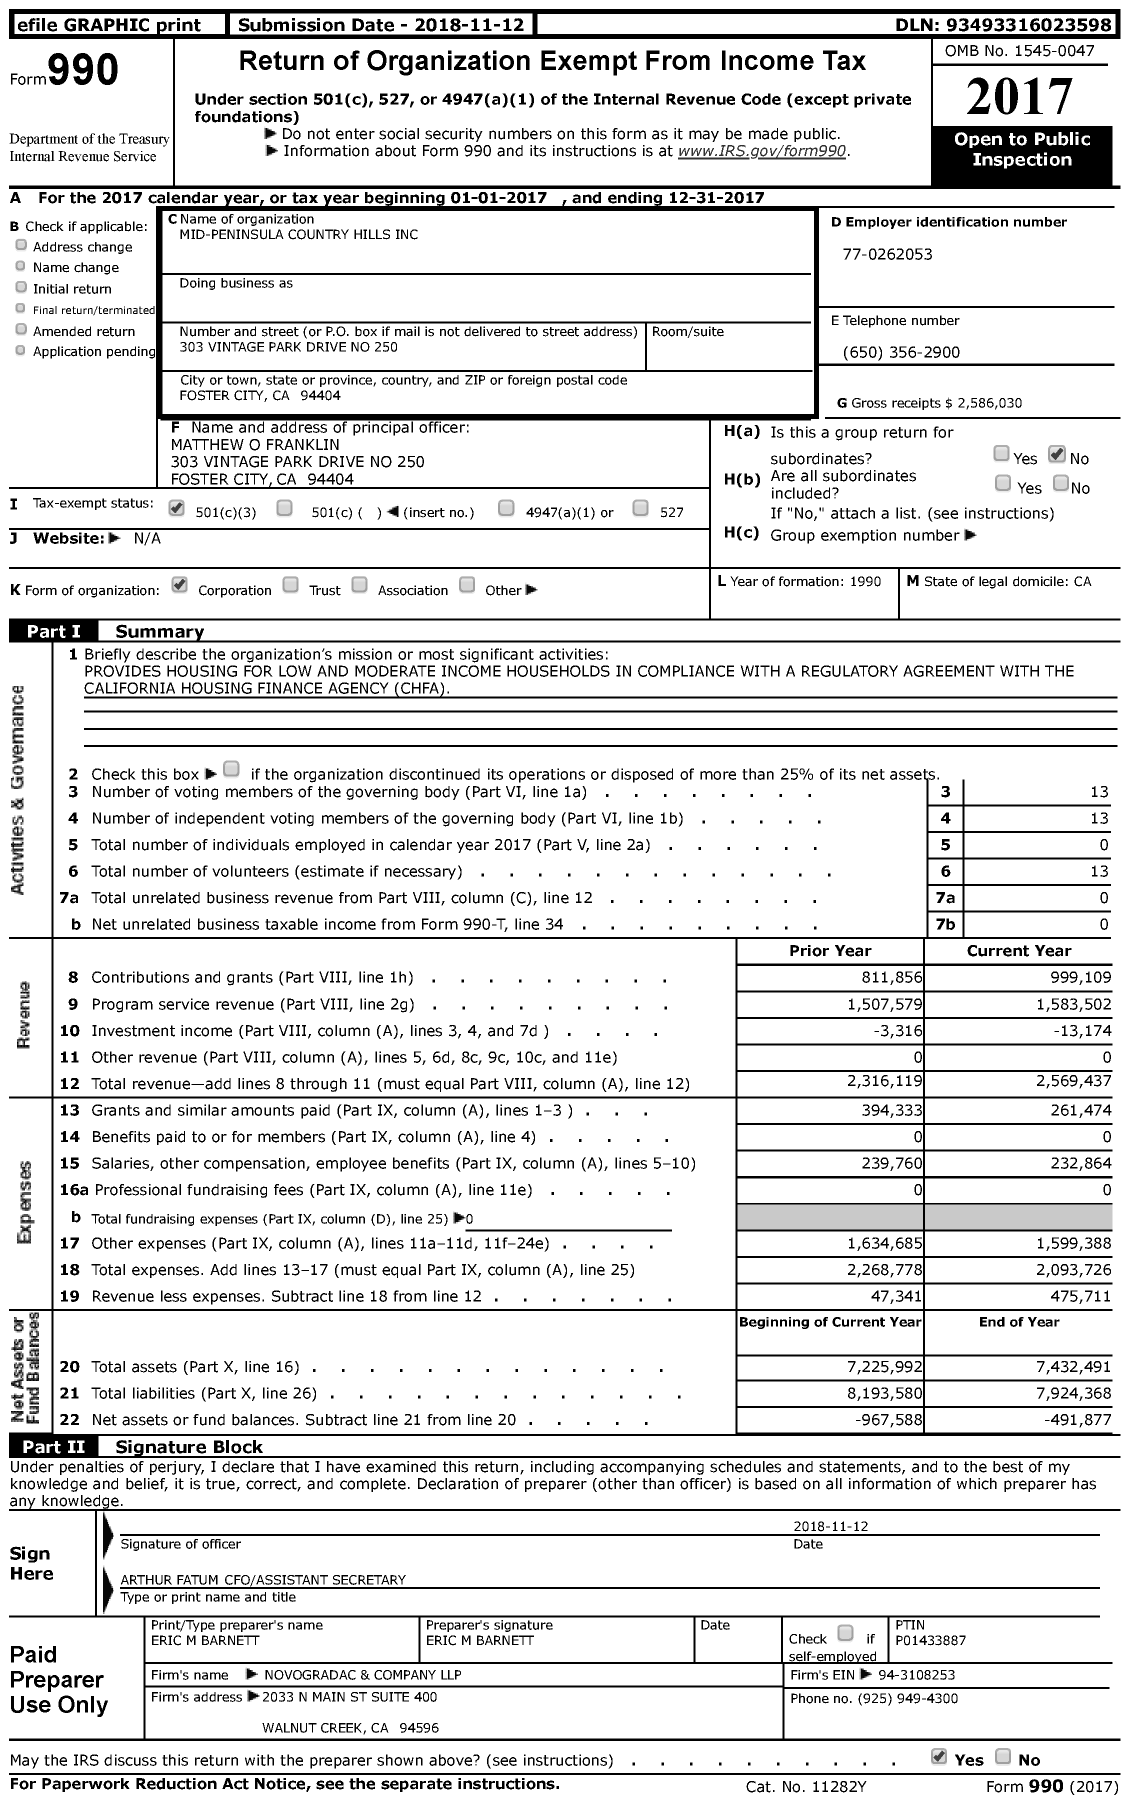 Image of first page of 2017 Form 990 for Mid-Peninsula Country Hills